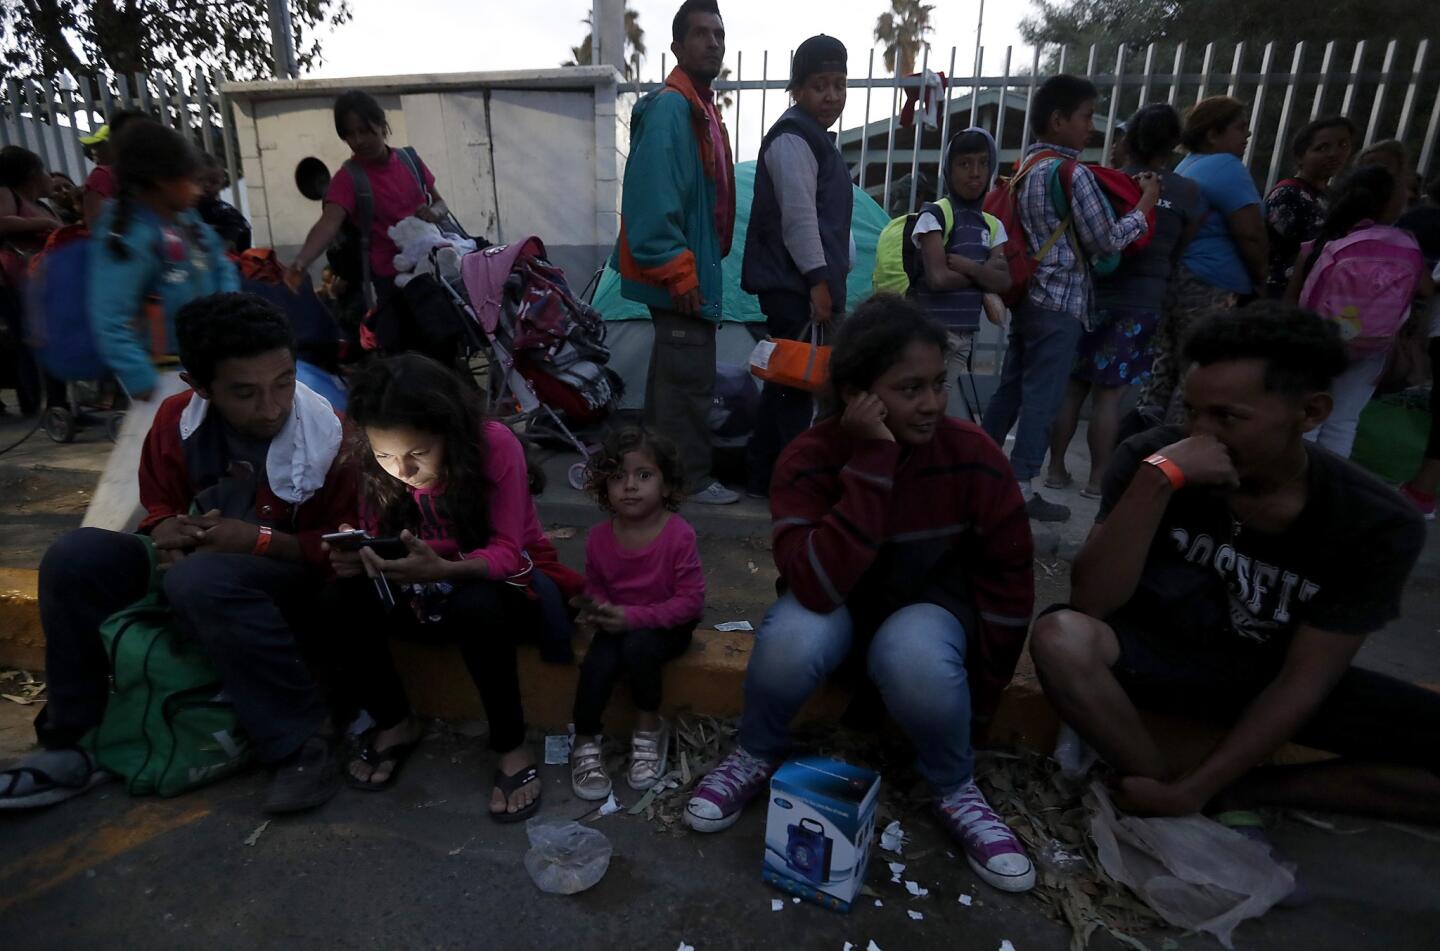 Migrants who are part of the caravan that has made its way from Honduras wait for shelter outside the Benito Juarez Sports Center in Tijuana on Nov. 15.